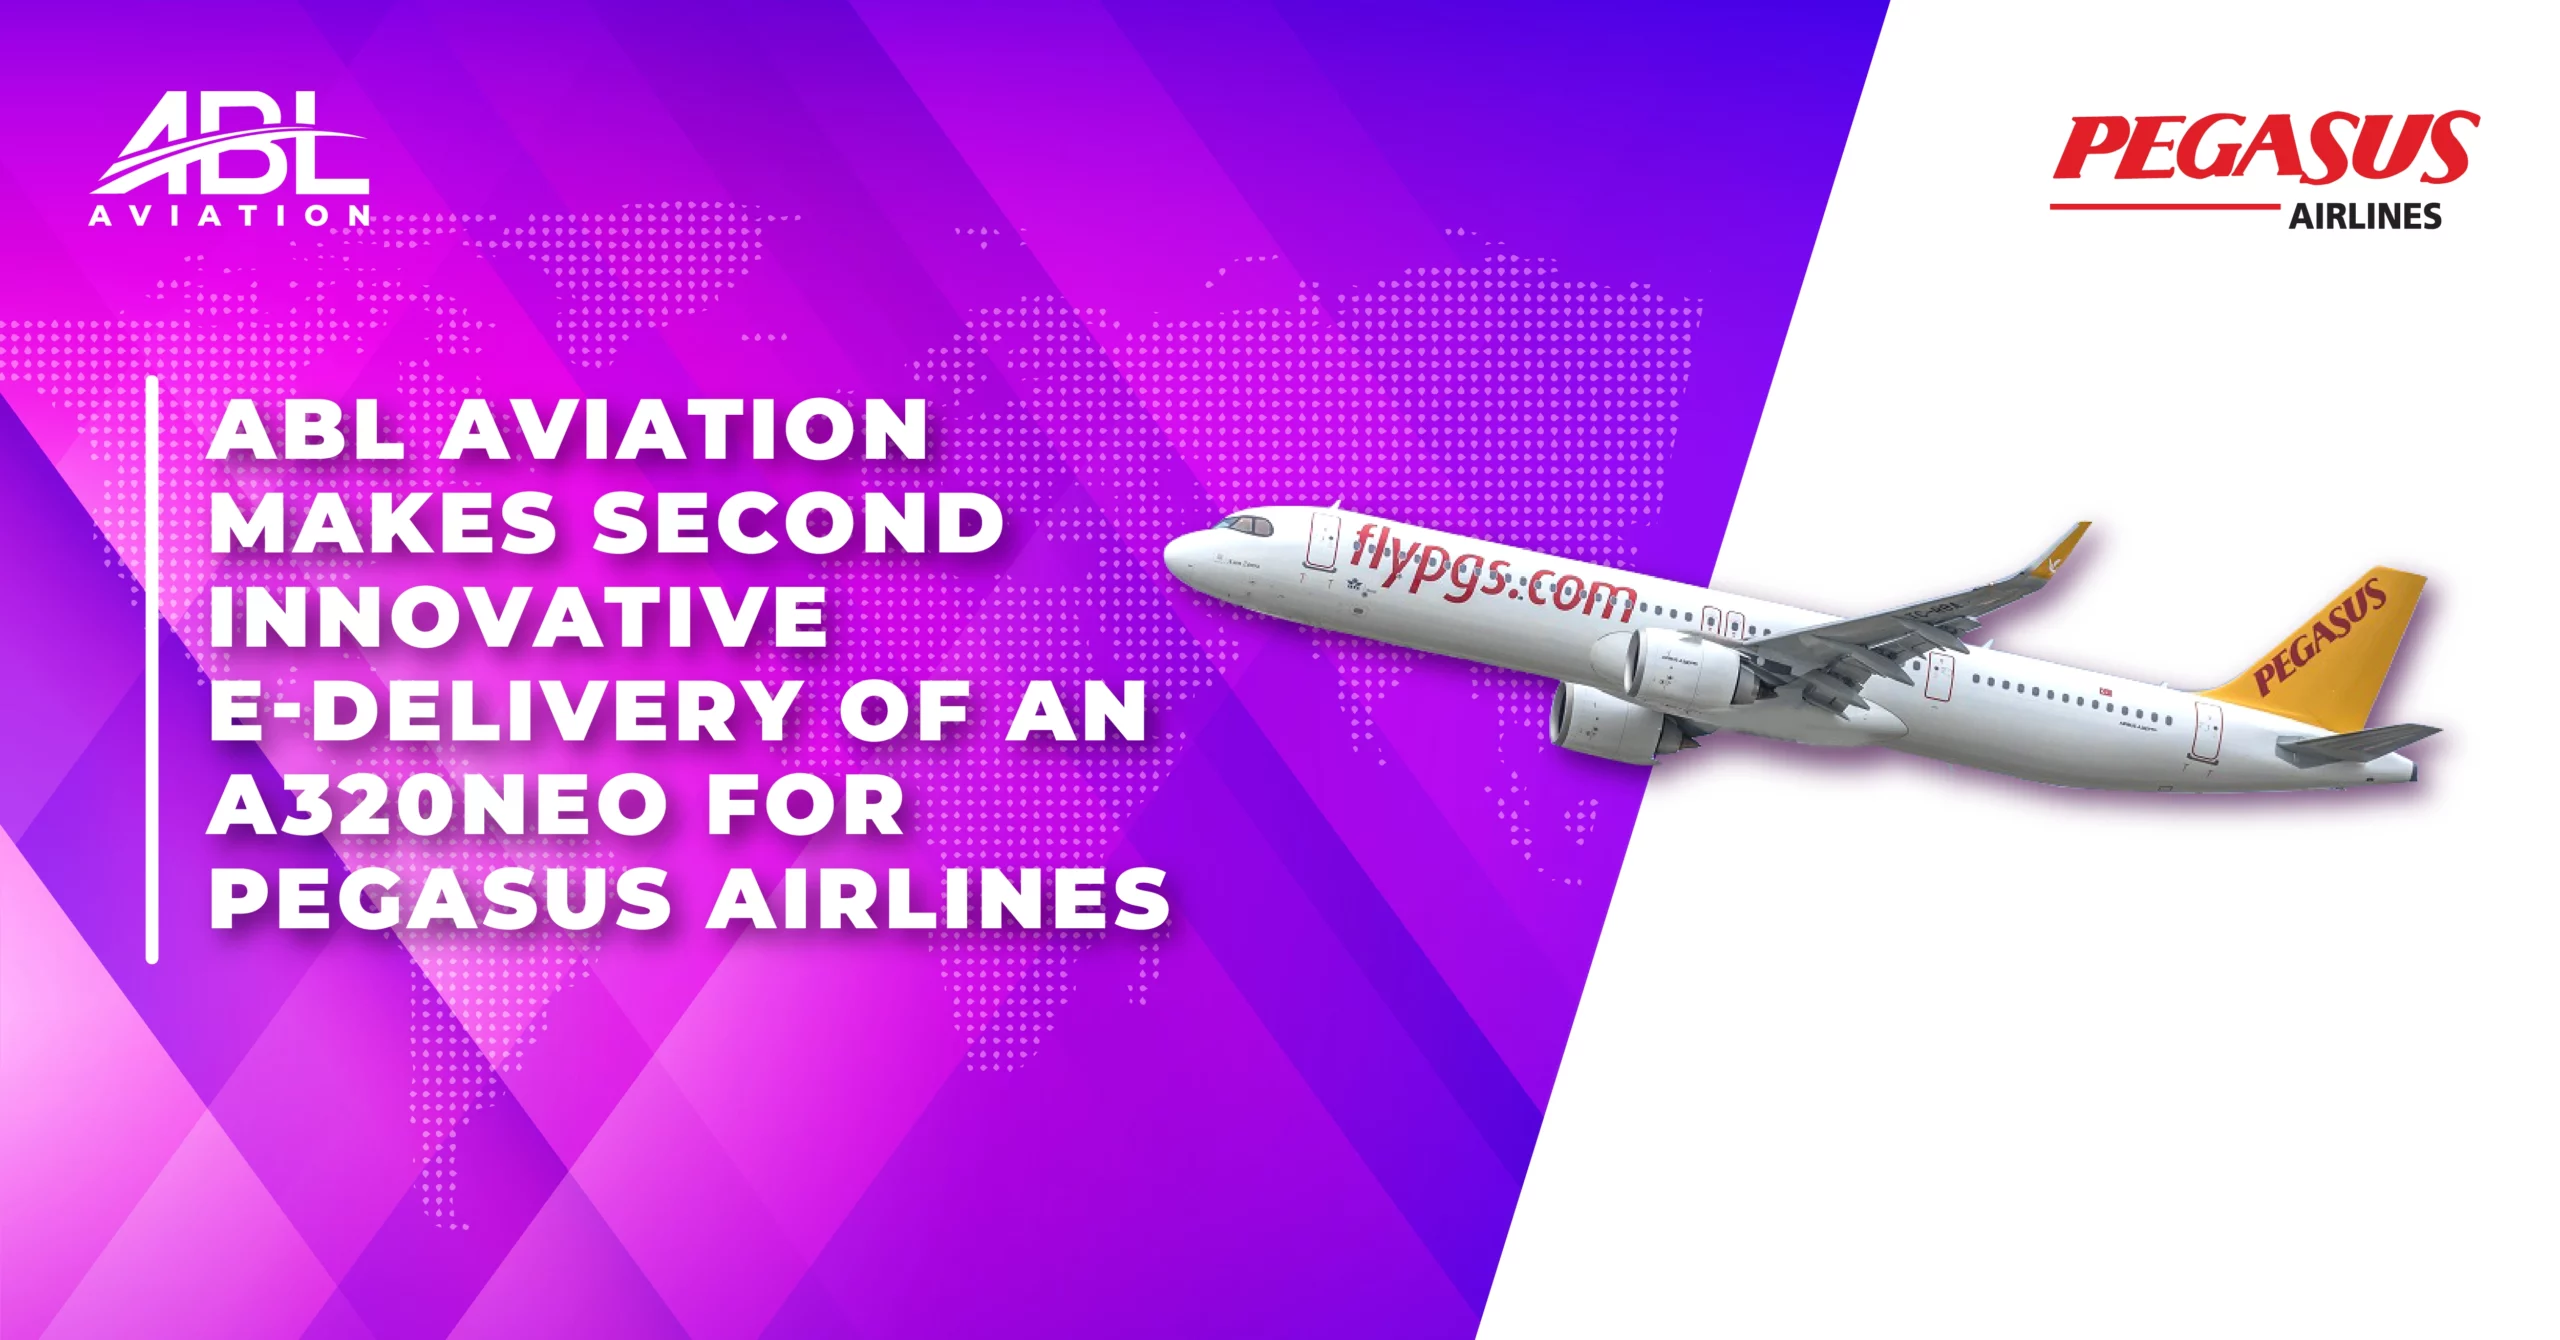 ABL Aviation Makes Second Innovative E-delivery of an A320neo for Pegasus Airlines